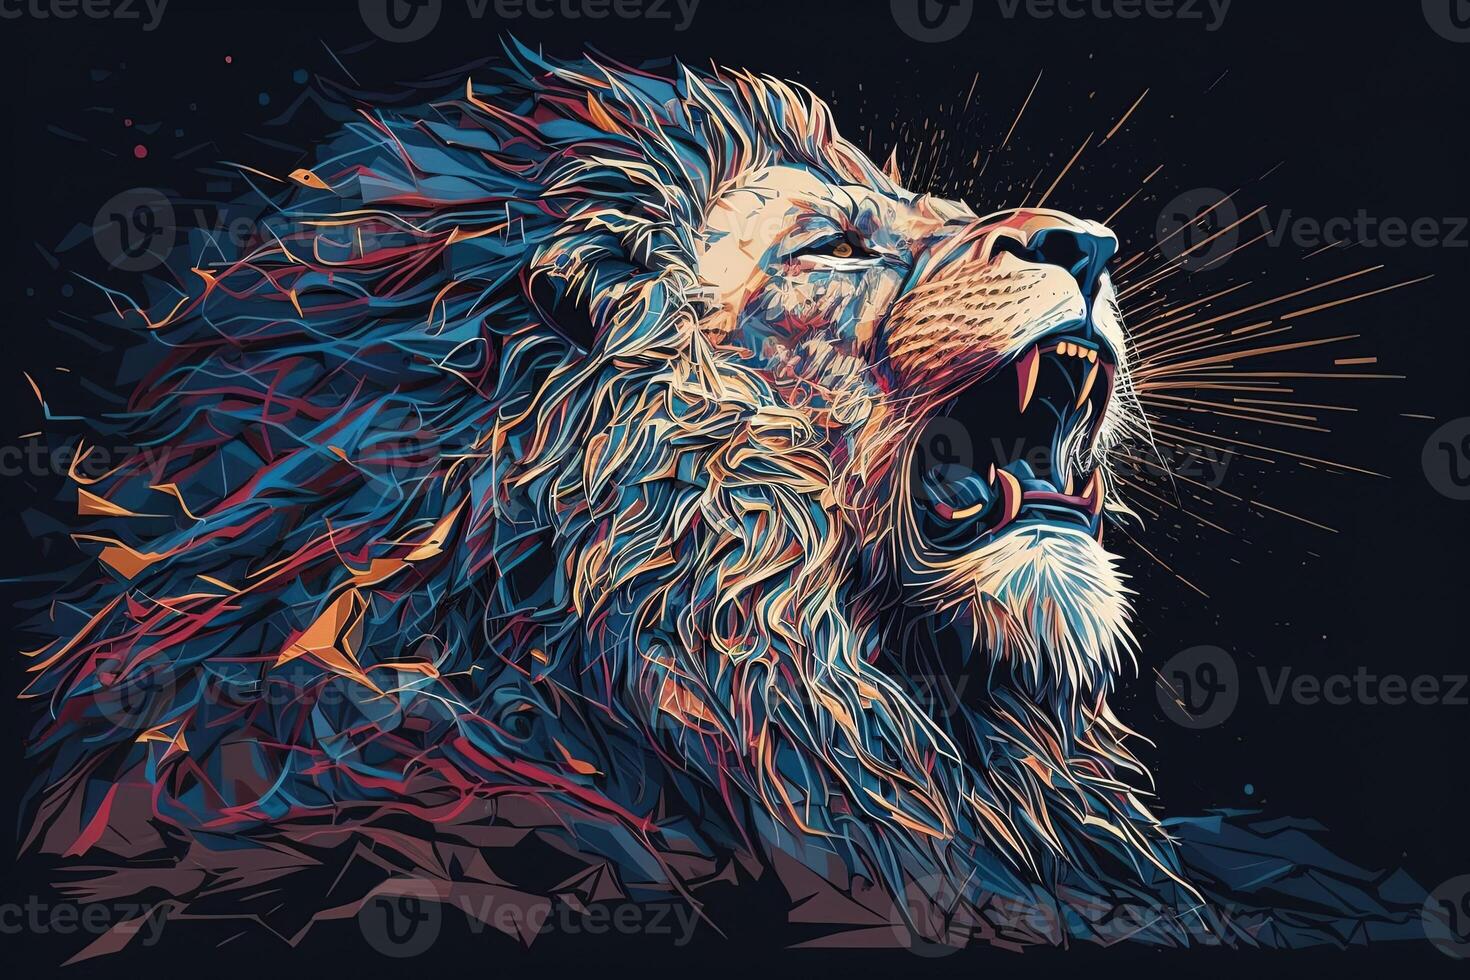 Poster of Lion roaring, Abstract poster of a dangerous and powerful roaring male lion. . Creative fire flames art paint coming from the mad king of the jungle. photo